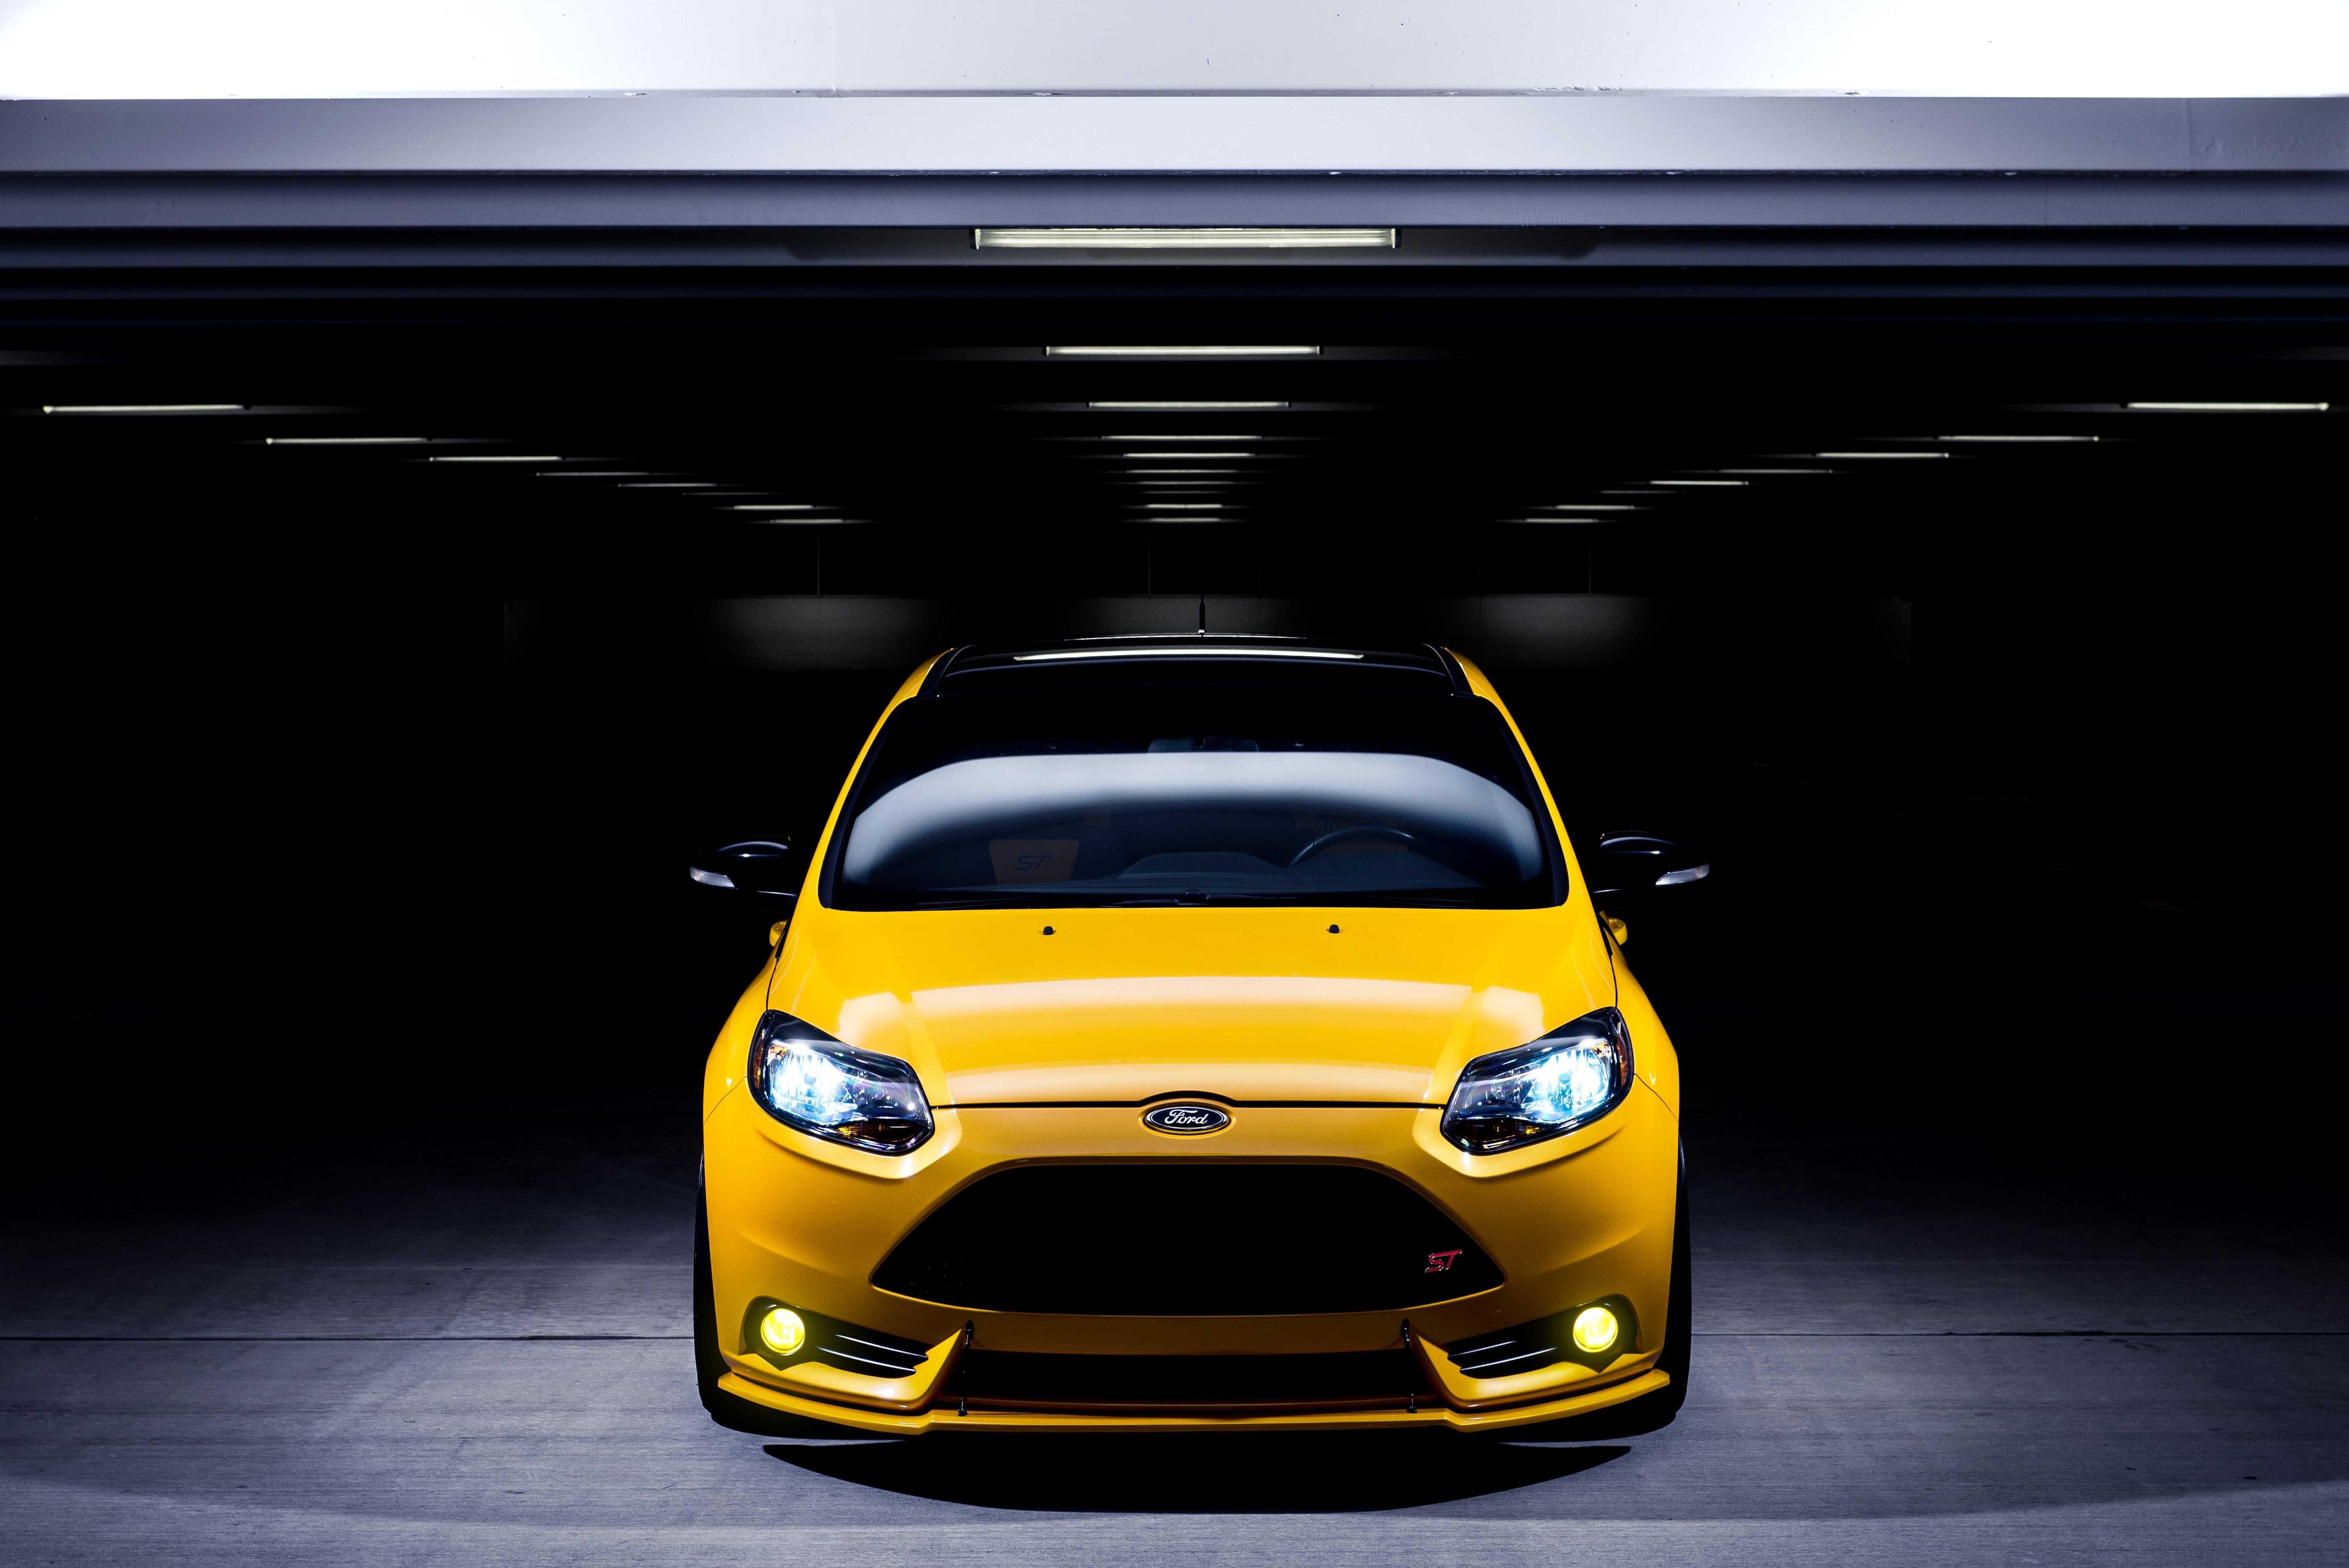 Ford Focus St Wallpaper HD Photo, Wallpaper and other Image